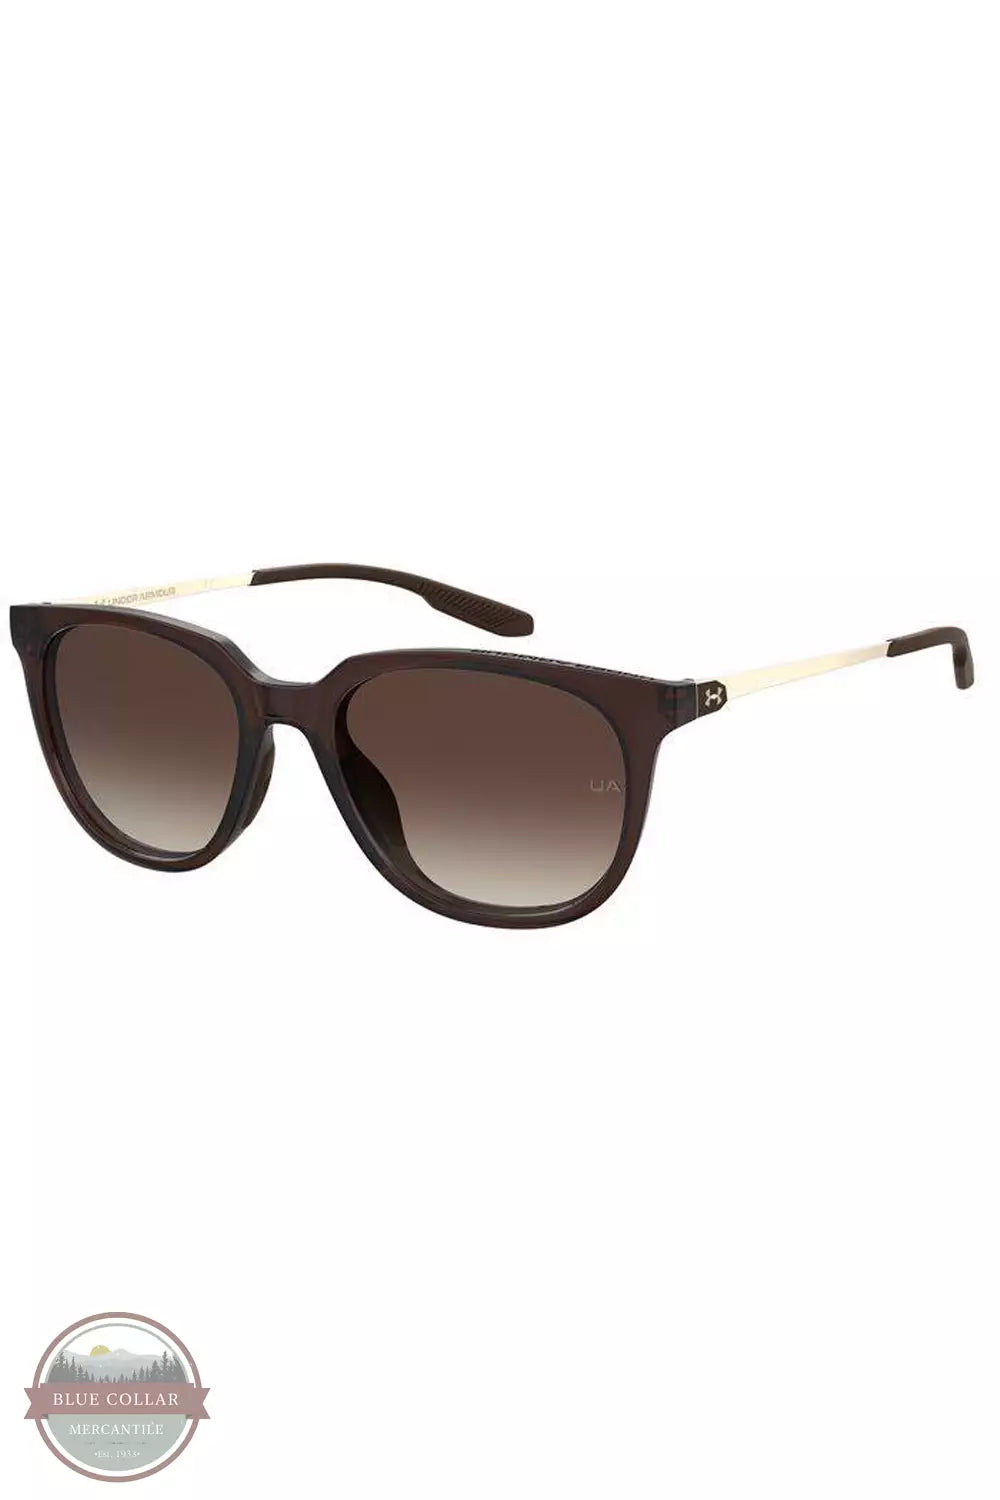 Under Armour 1372222-200 Circuit Sunglasses in Brown / Shiny Gold Profile View